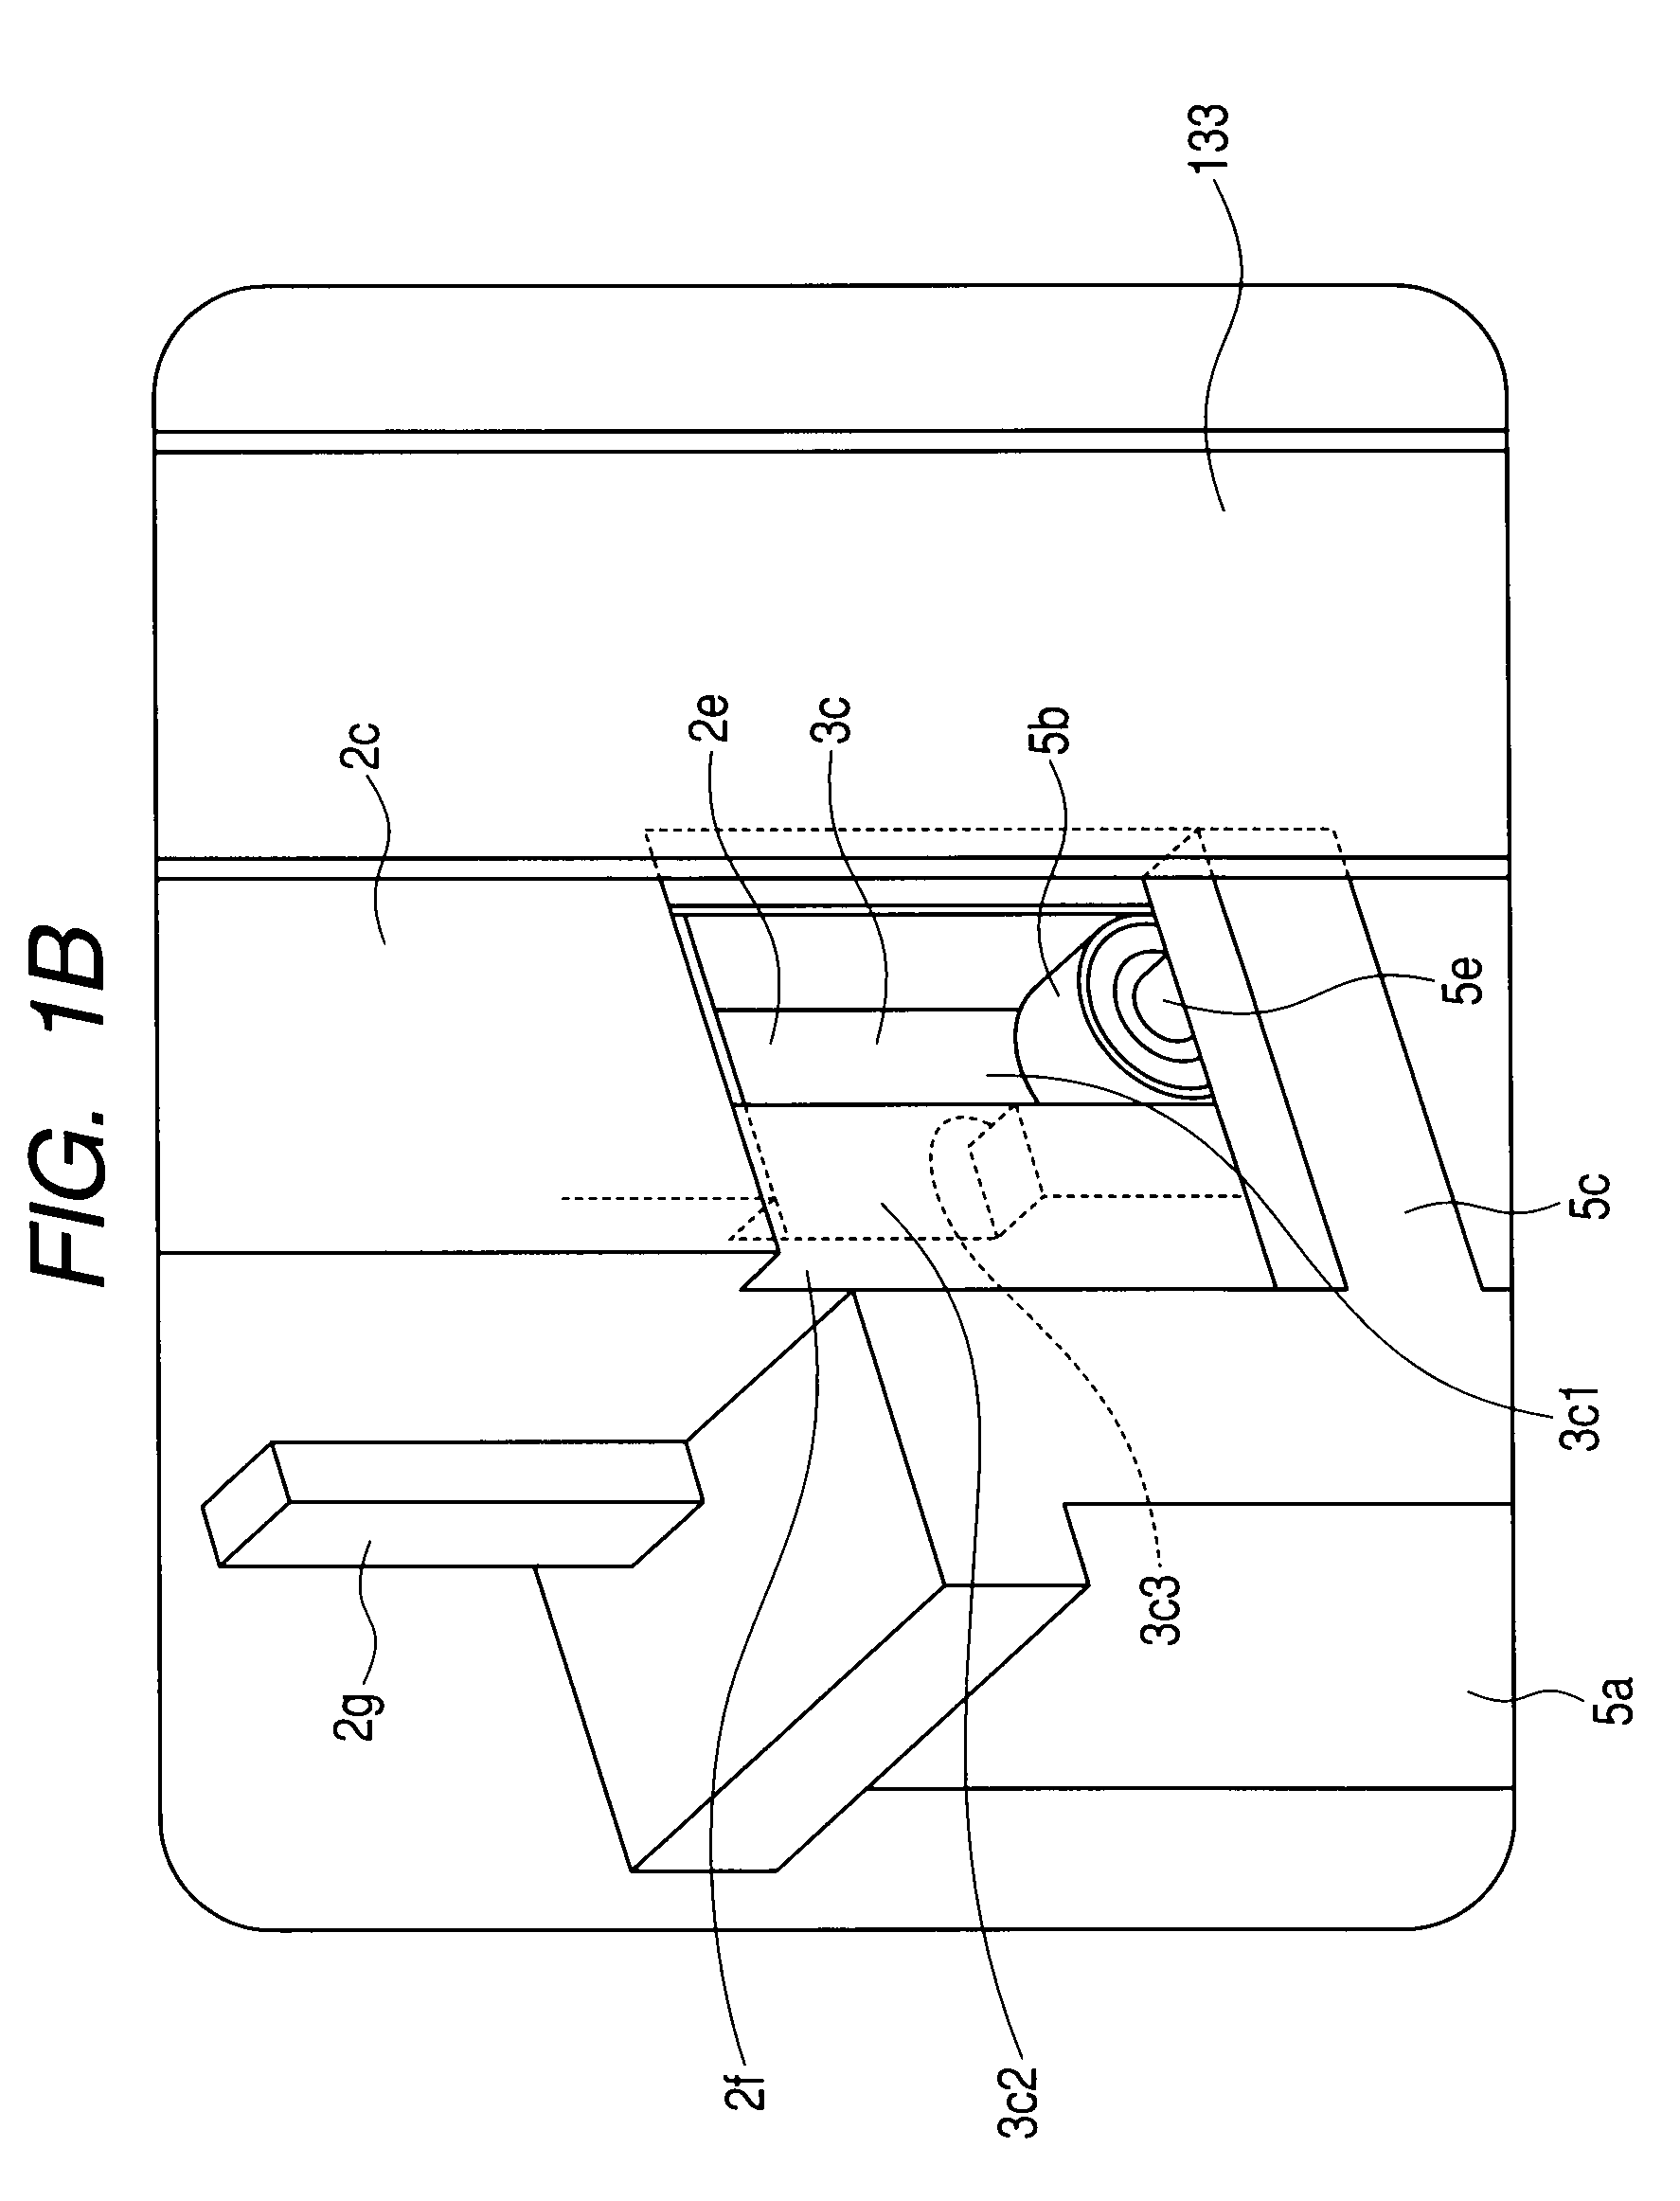 Lid opening/closing system for closed container